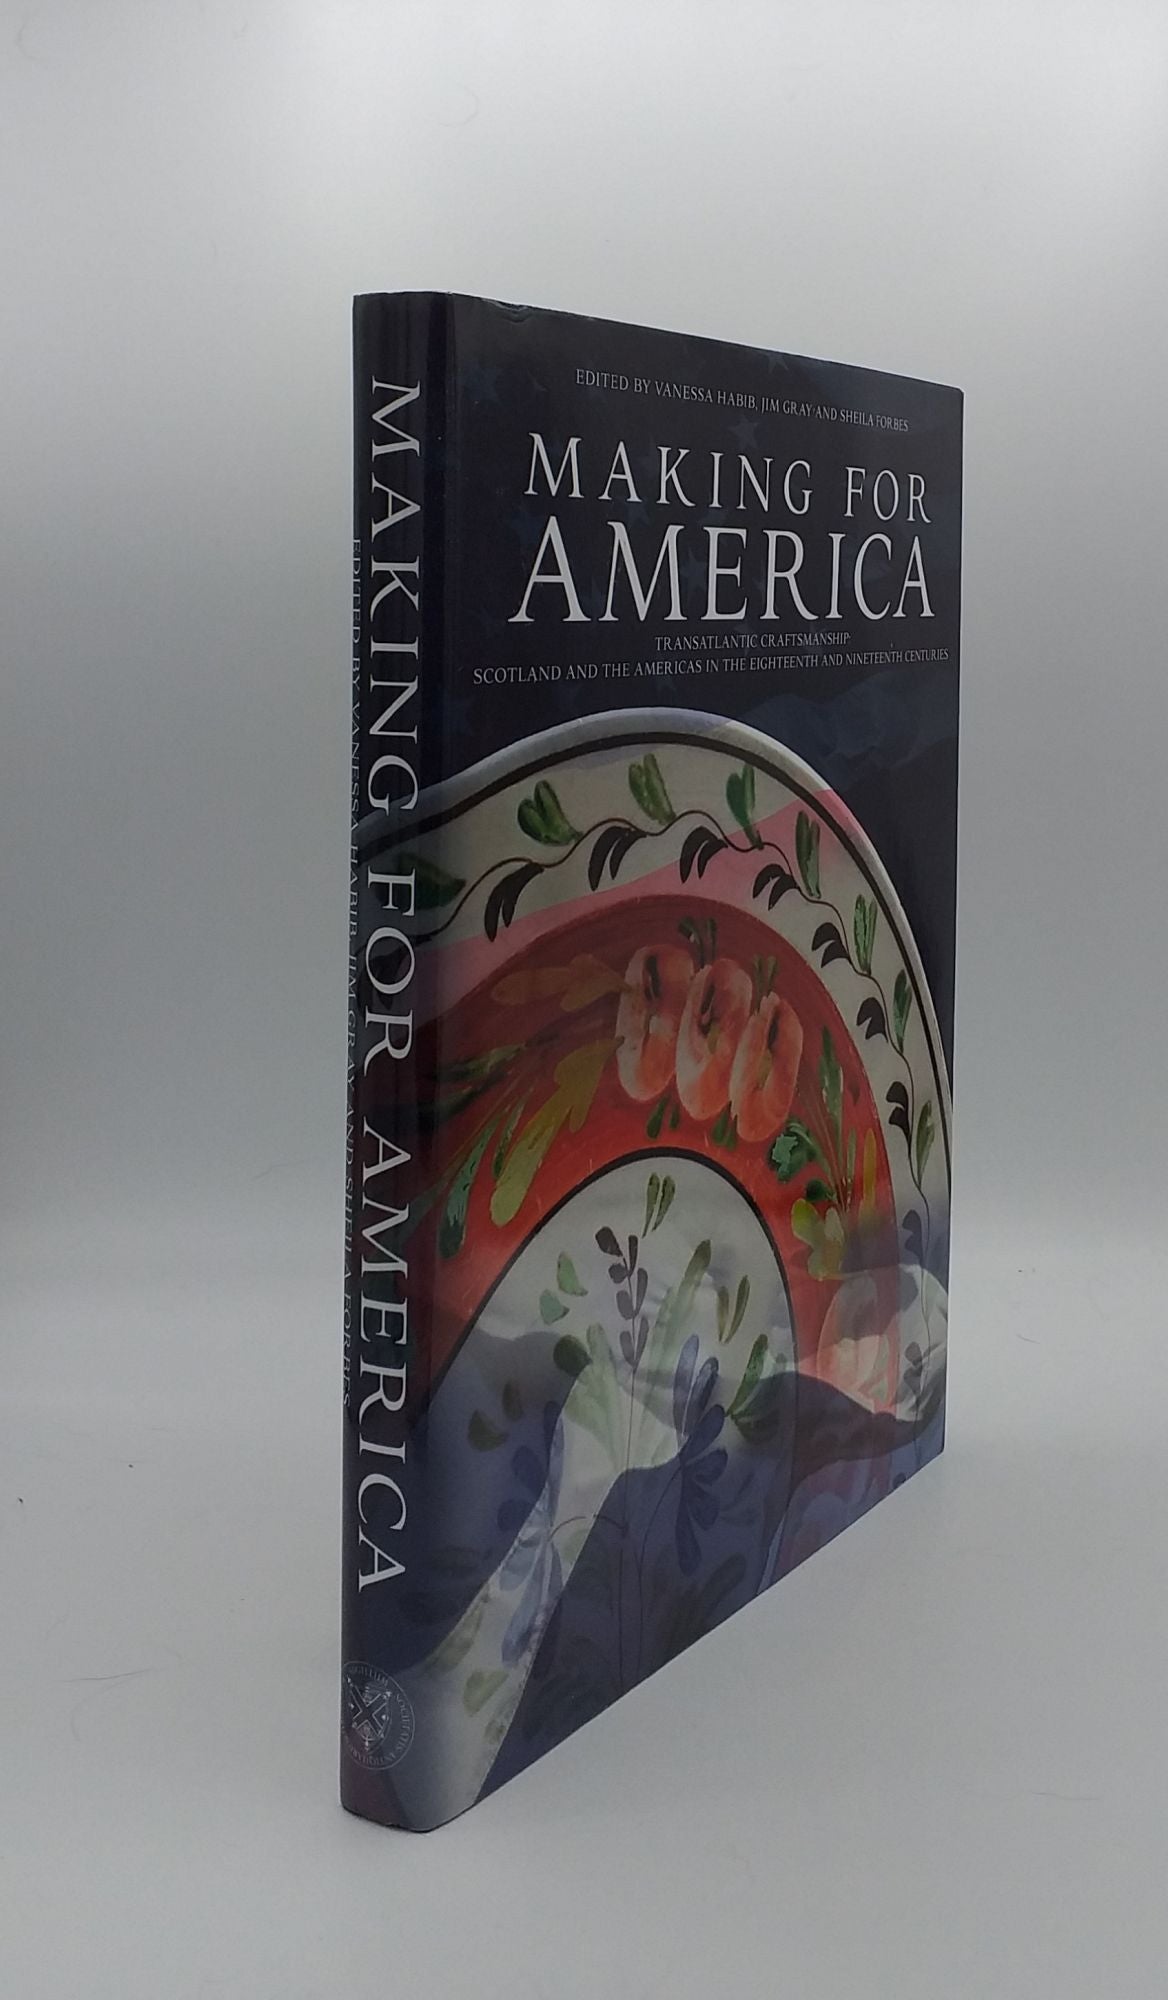 HABIB Vanessa, GRAY Jim, FORBES Sheila - Making for America Transatlantic Craftsmanship Scotland and the Americas in the Eighteenth and Nineteenth Centuries